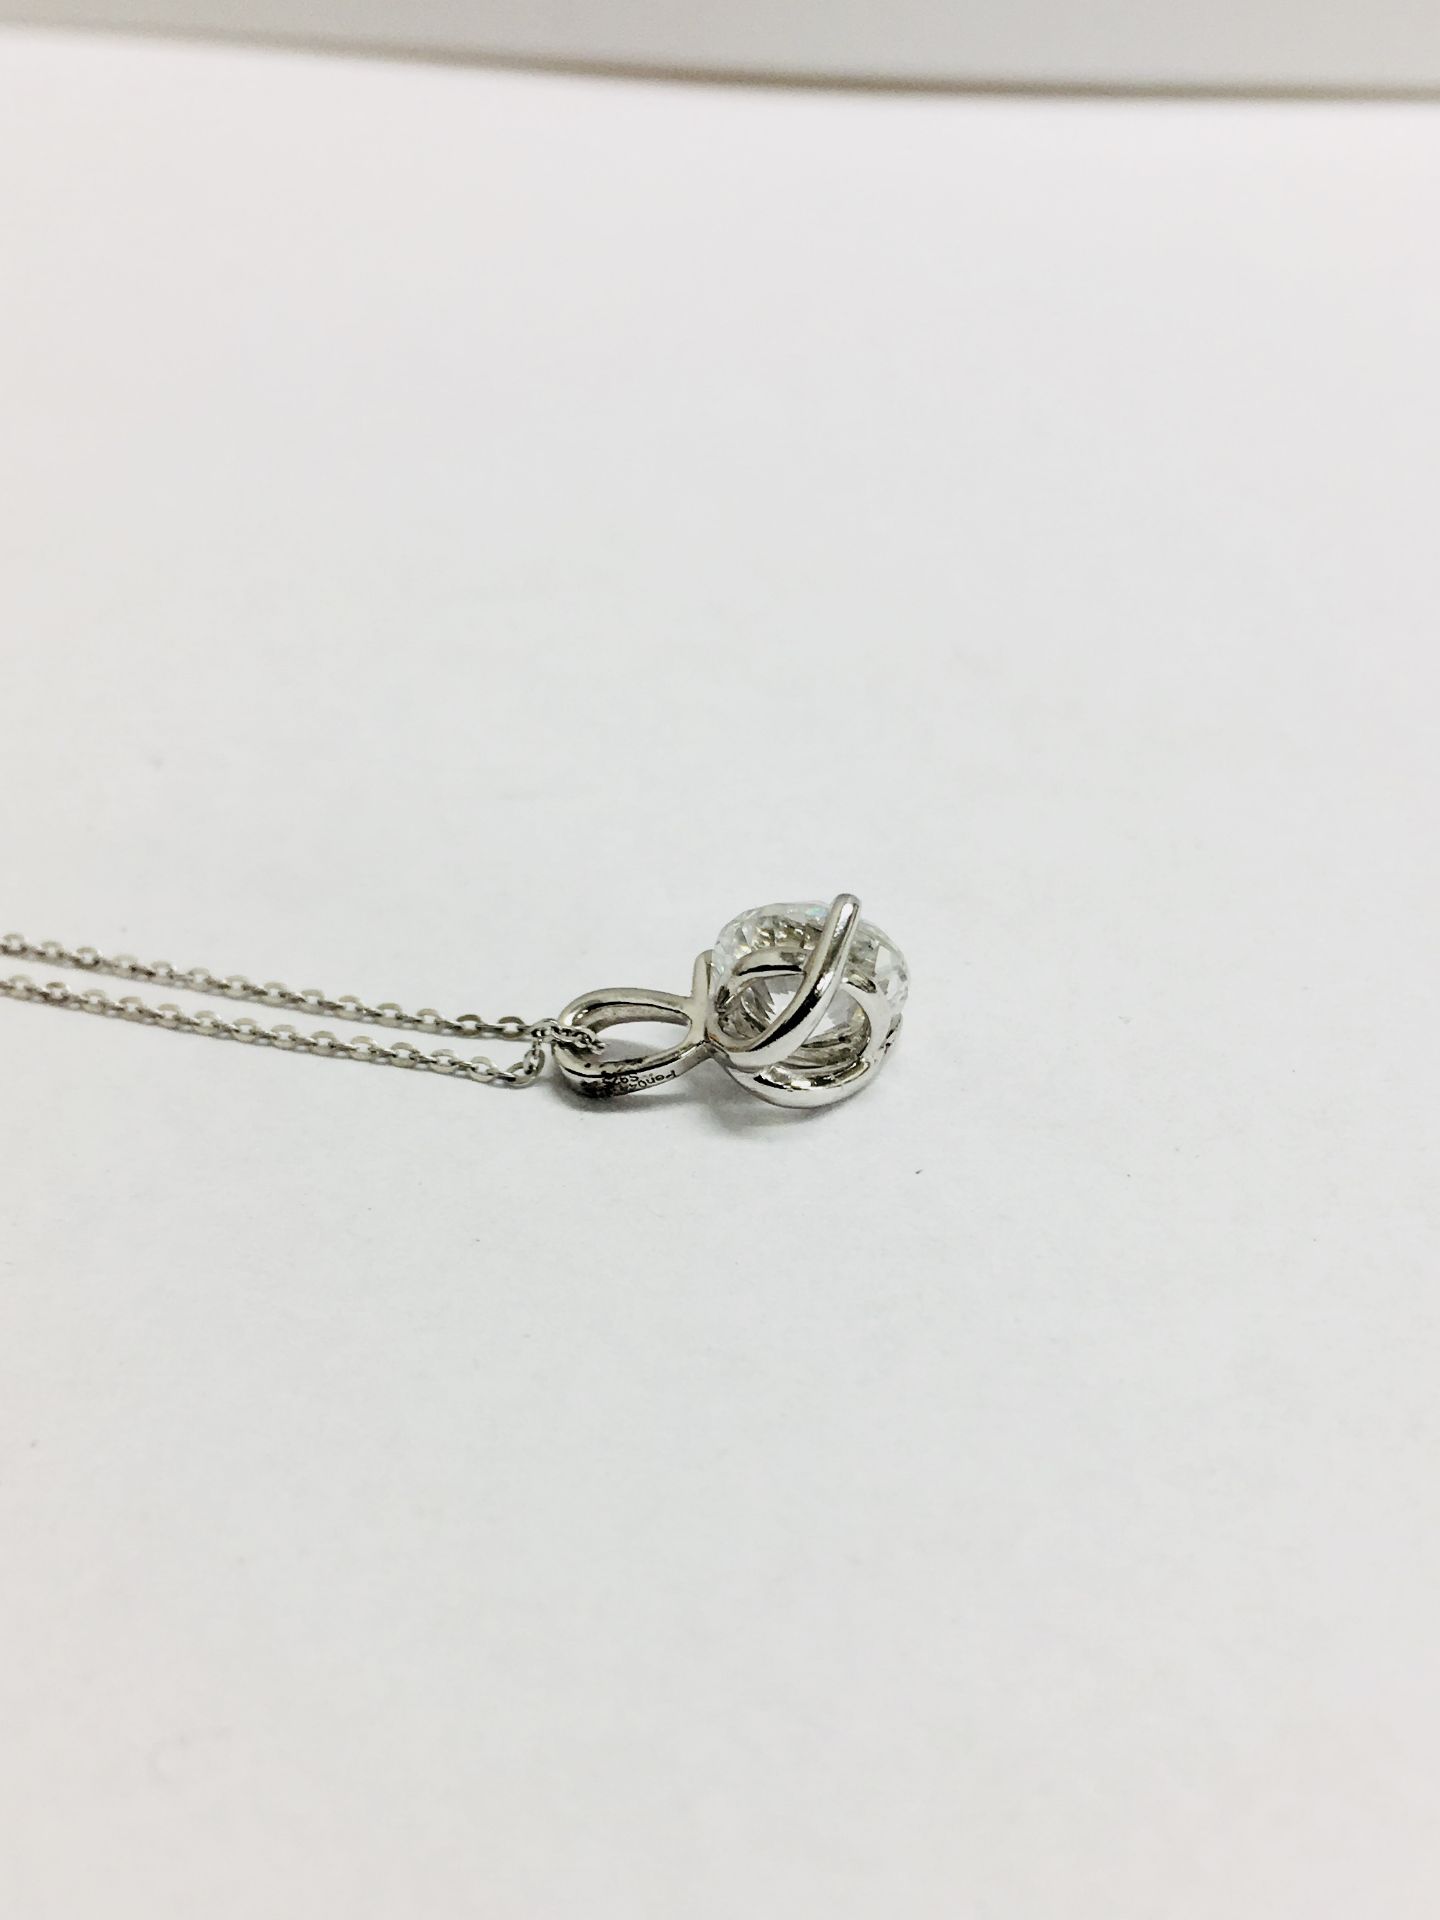 18ct gold diamond pendant and necklace ,0.50ct h vs diamond (enhanced) 18ct white setting and - Image 2 of 5